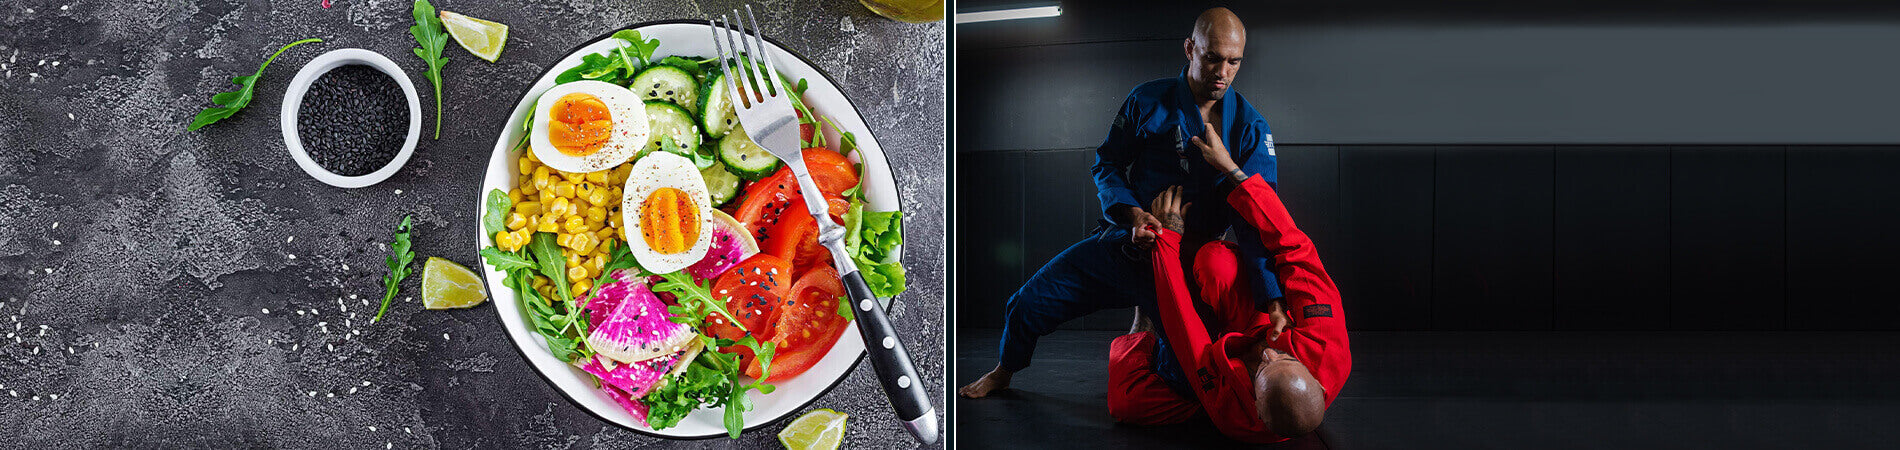 Keto Vs Paleo Vs Low-Carb: Which Diet is Better for BJJ Athletes